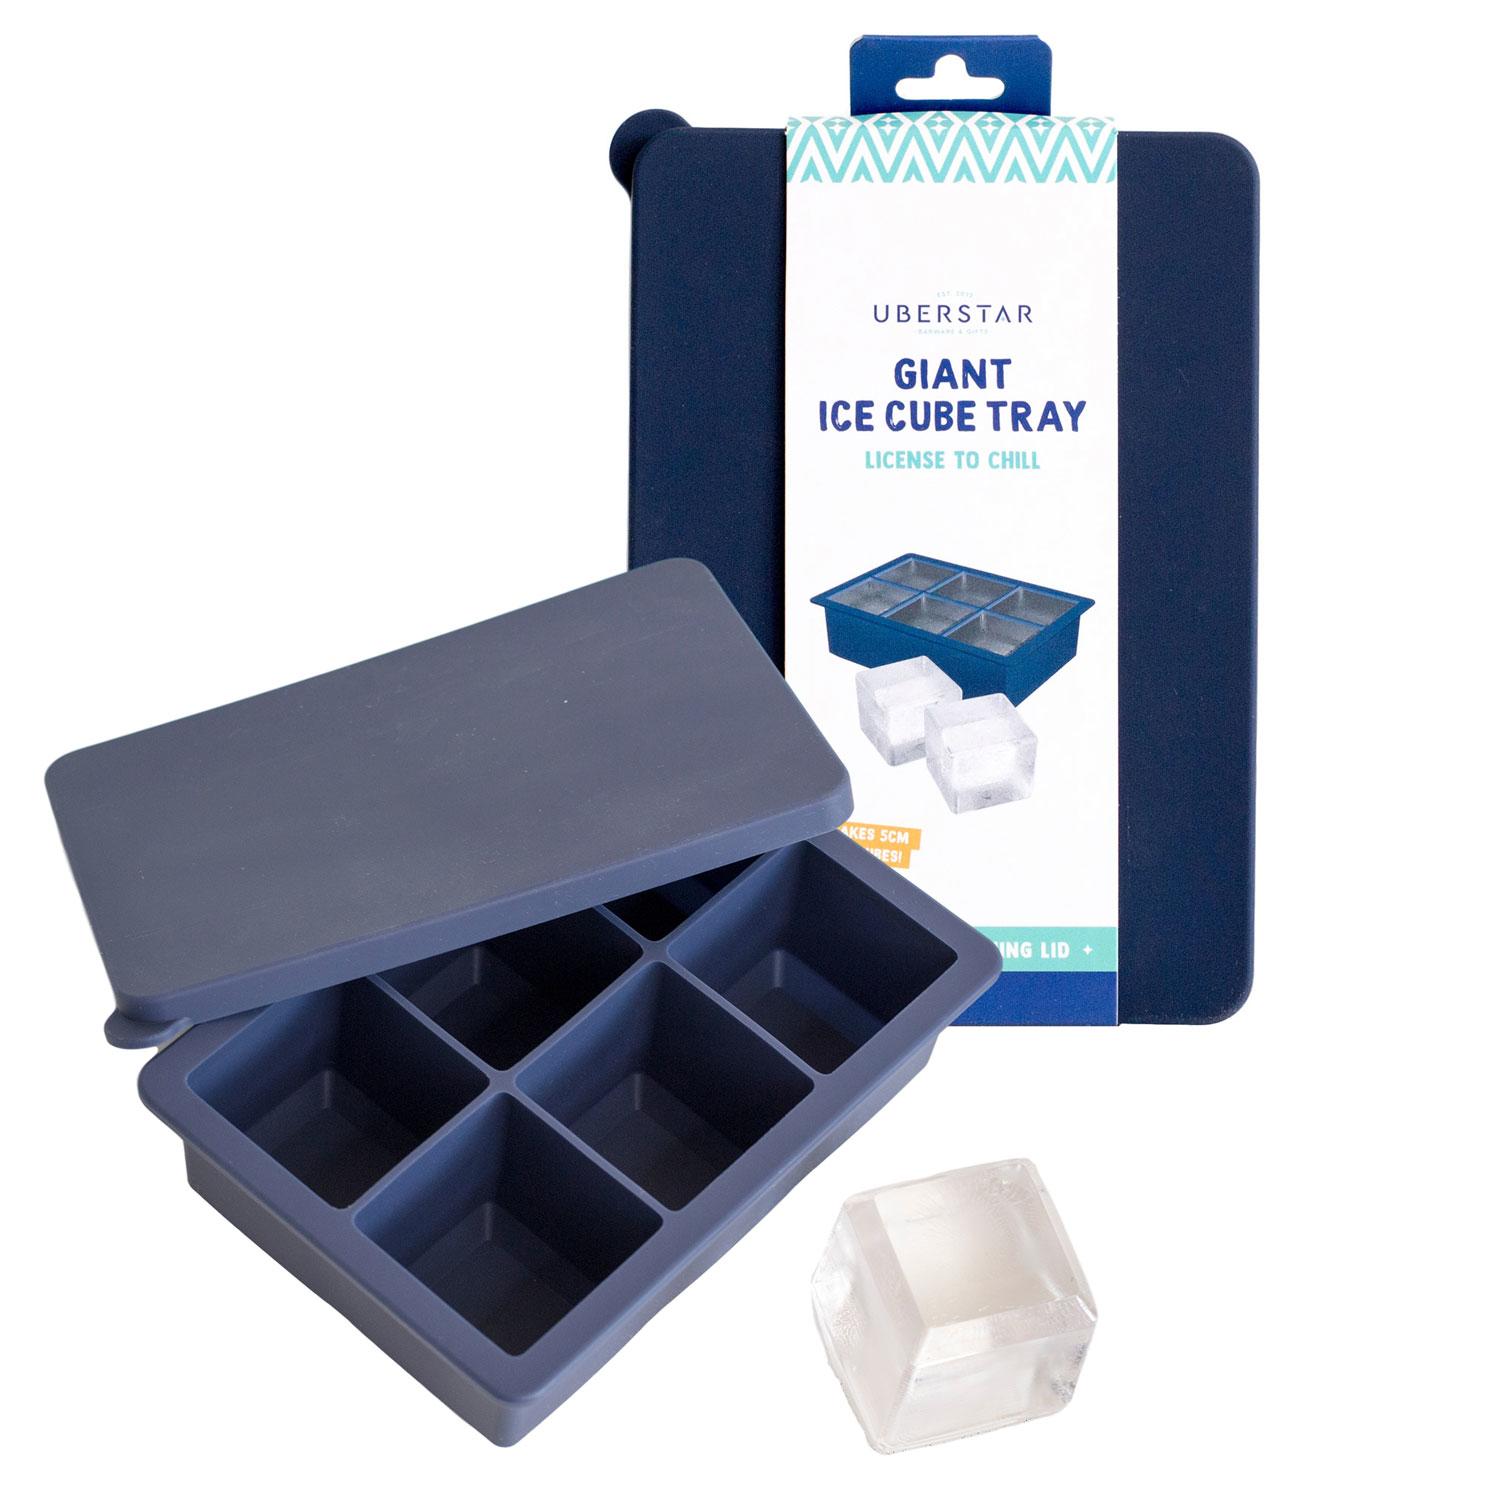 Uberstar Giant Ice Cube Tray - Only £10.99